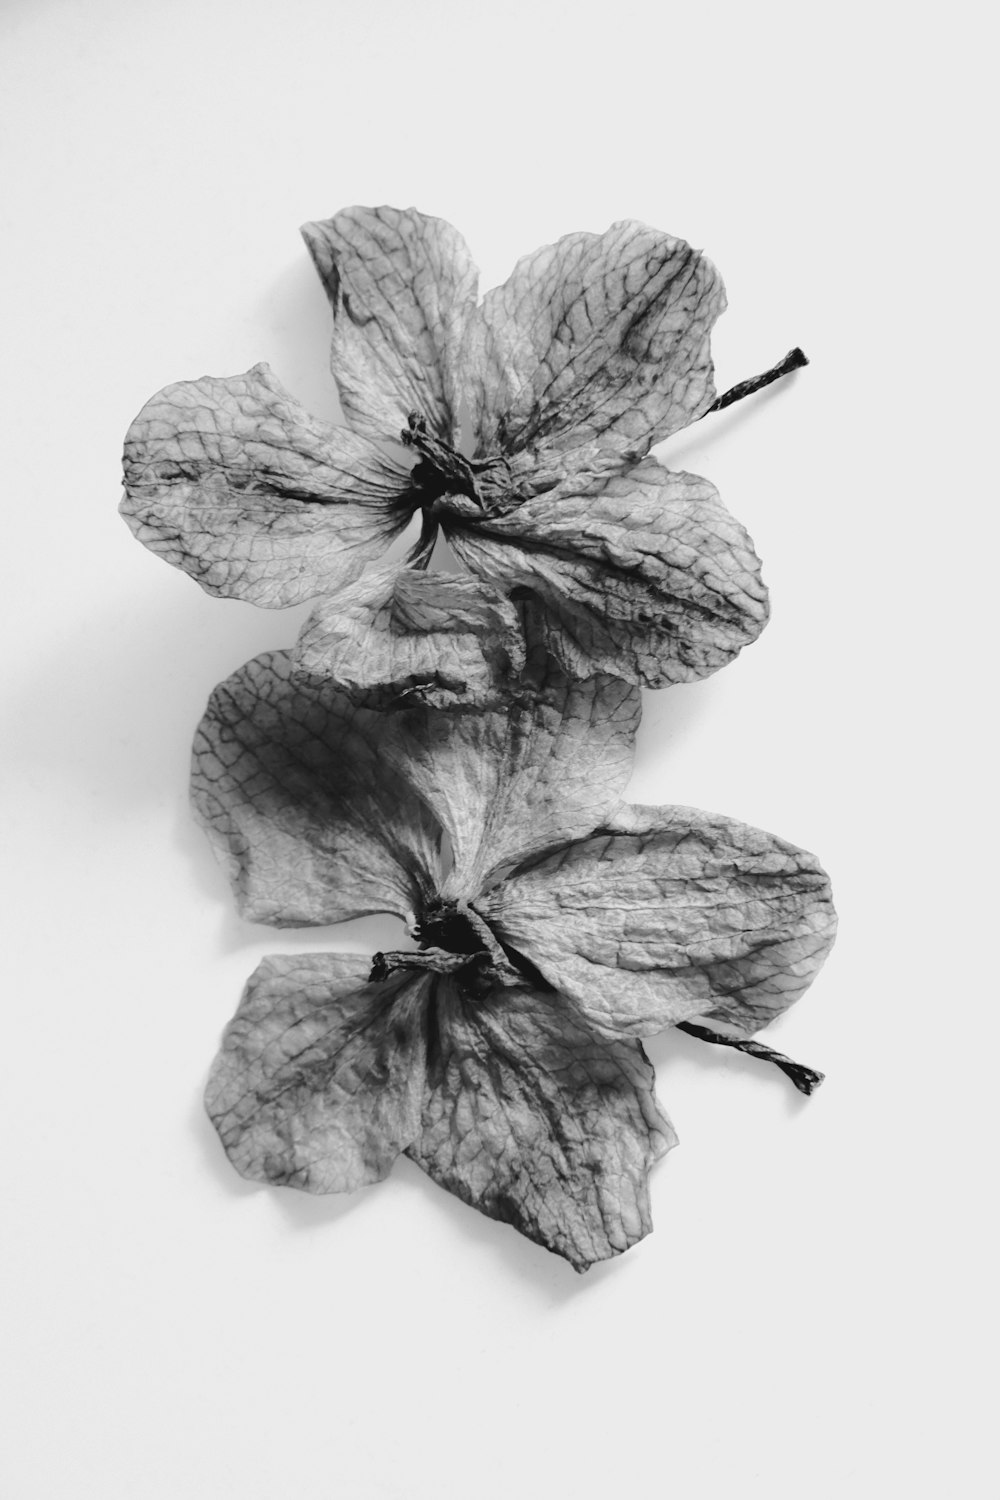 three dried flowers on a white surface